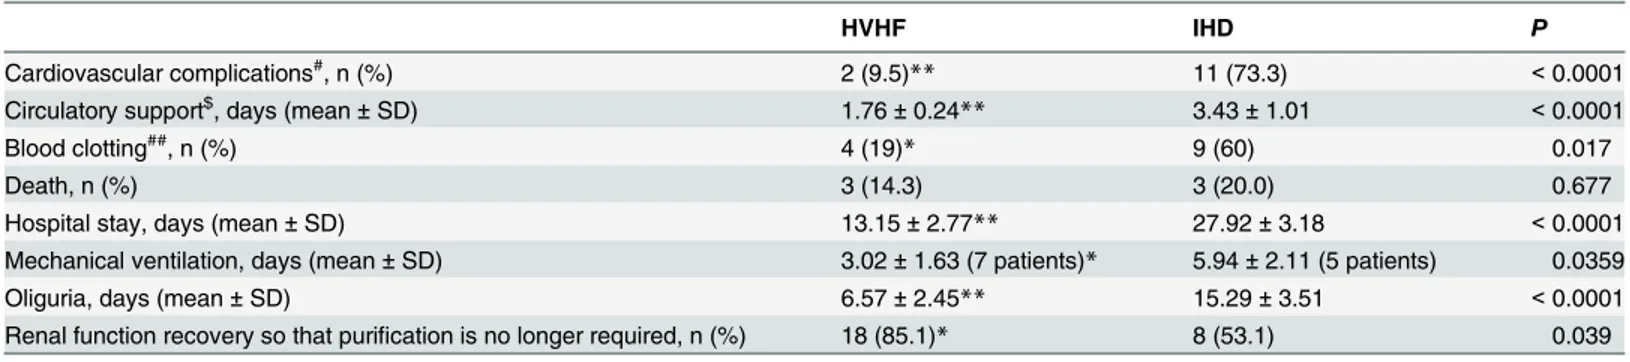 Table 4. Comparisons of clinical outcomes at hospital discharge between patients in the HVHF and IHD groups.